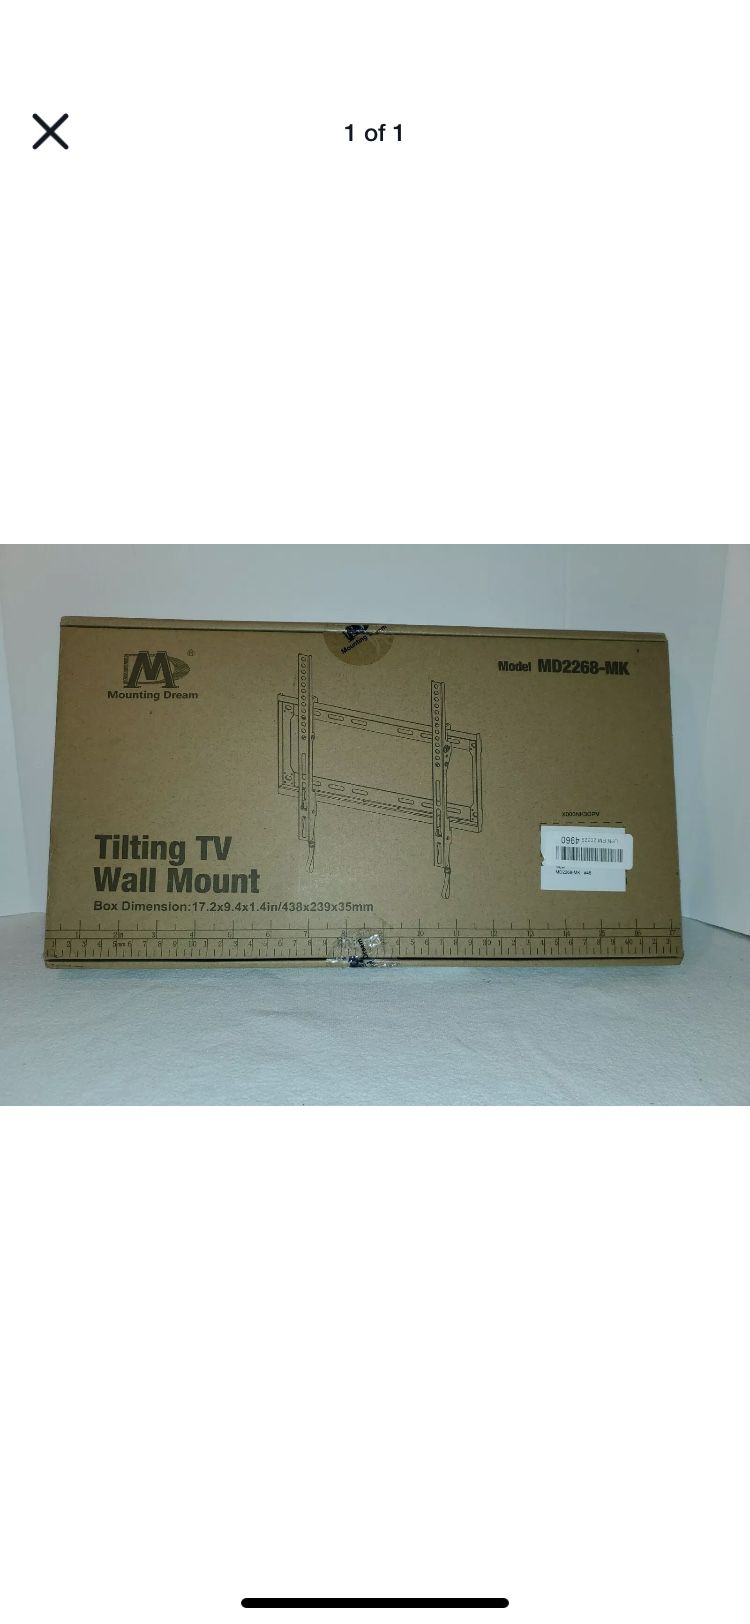 Mounting Dream MD2268-MK TV Wall Mount Tilting Bracket for Most 26-55 Inch LED